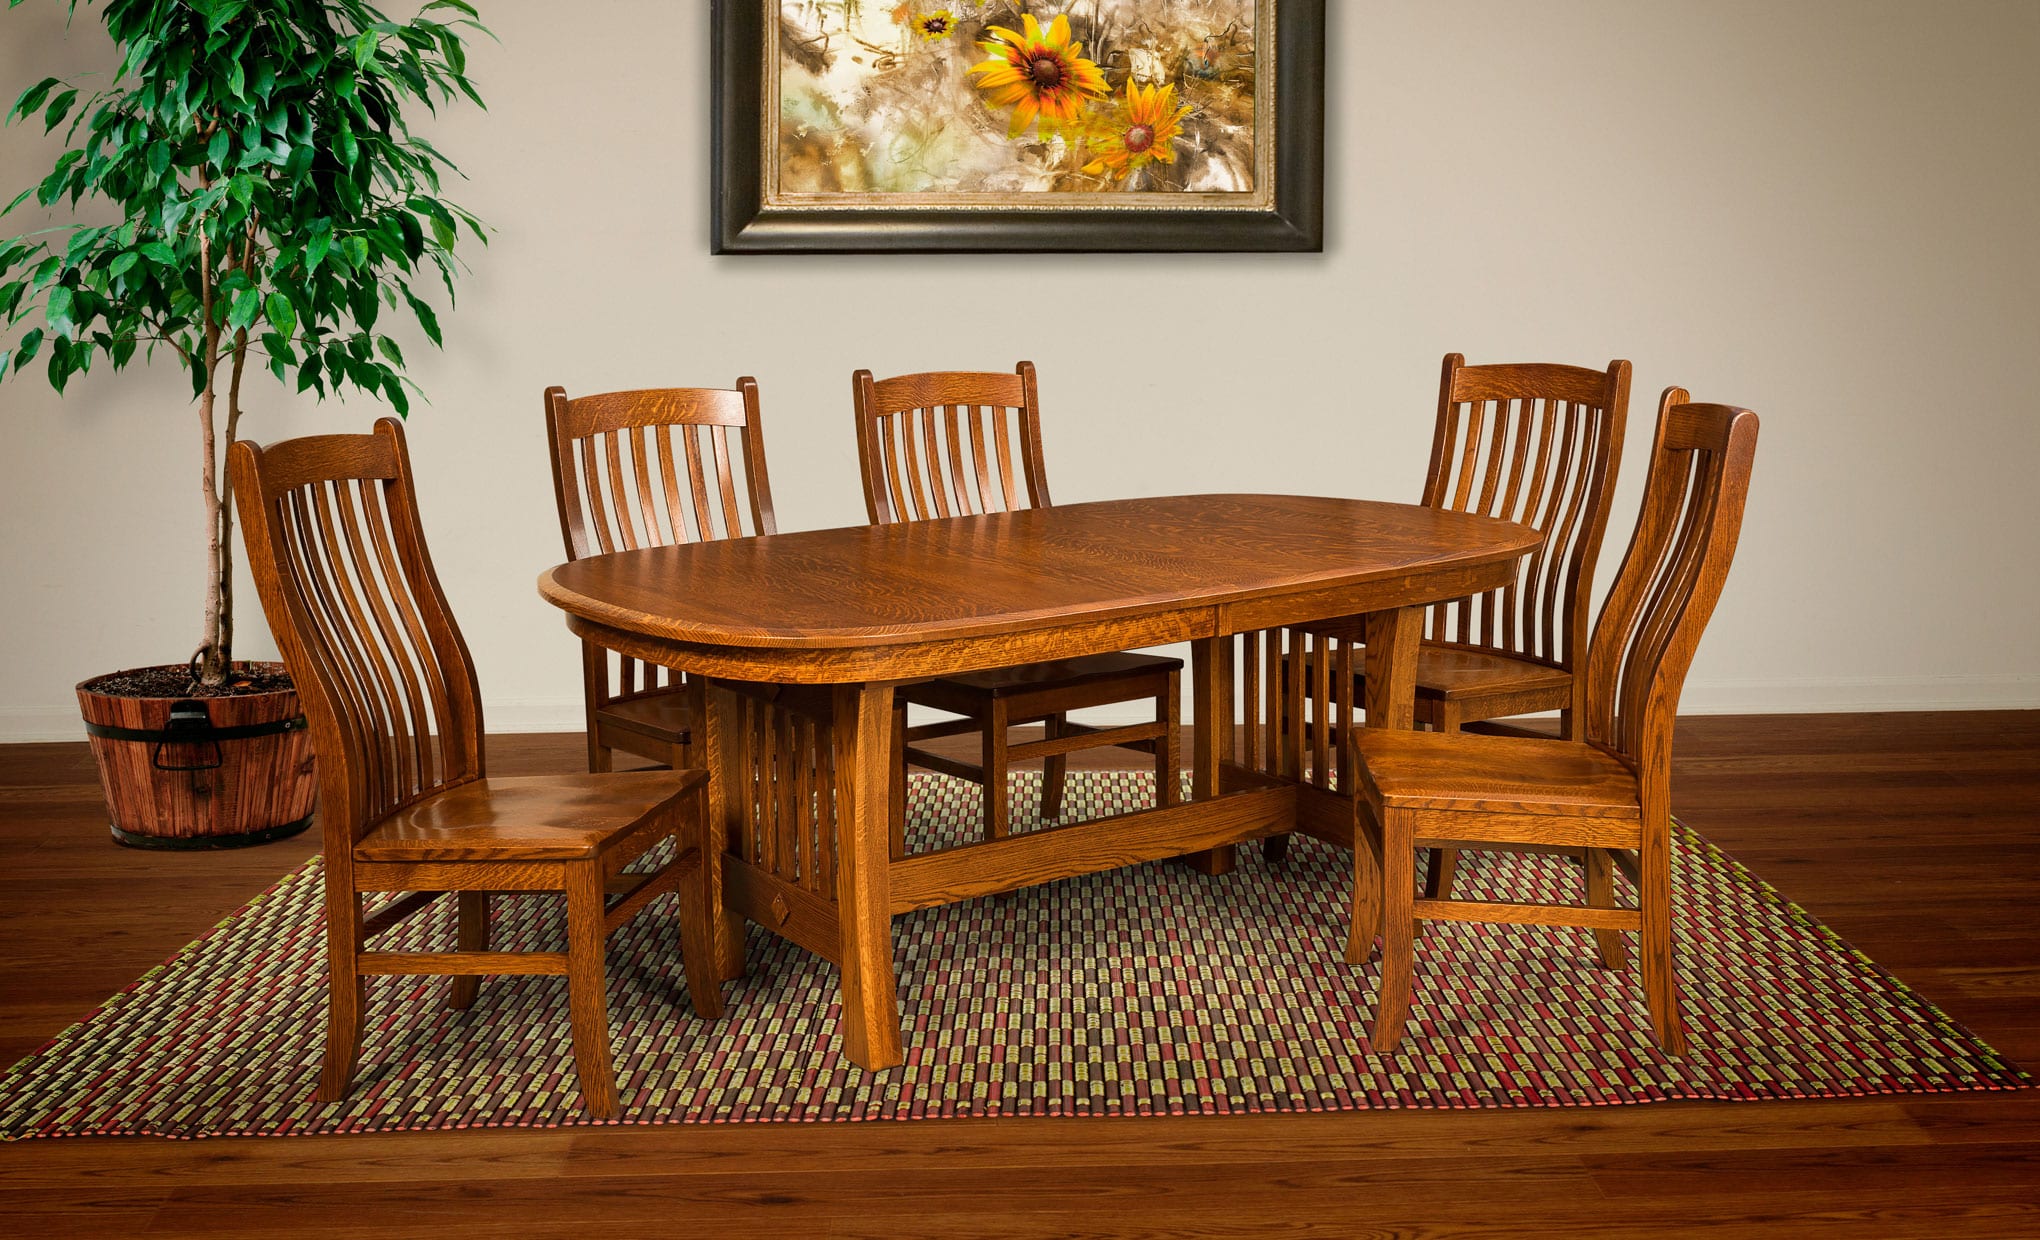 Arts And Crafts Dining Chair Amish, Arts And Crafts Dining Table